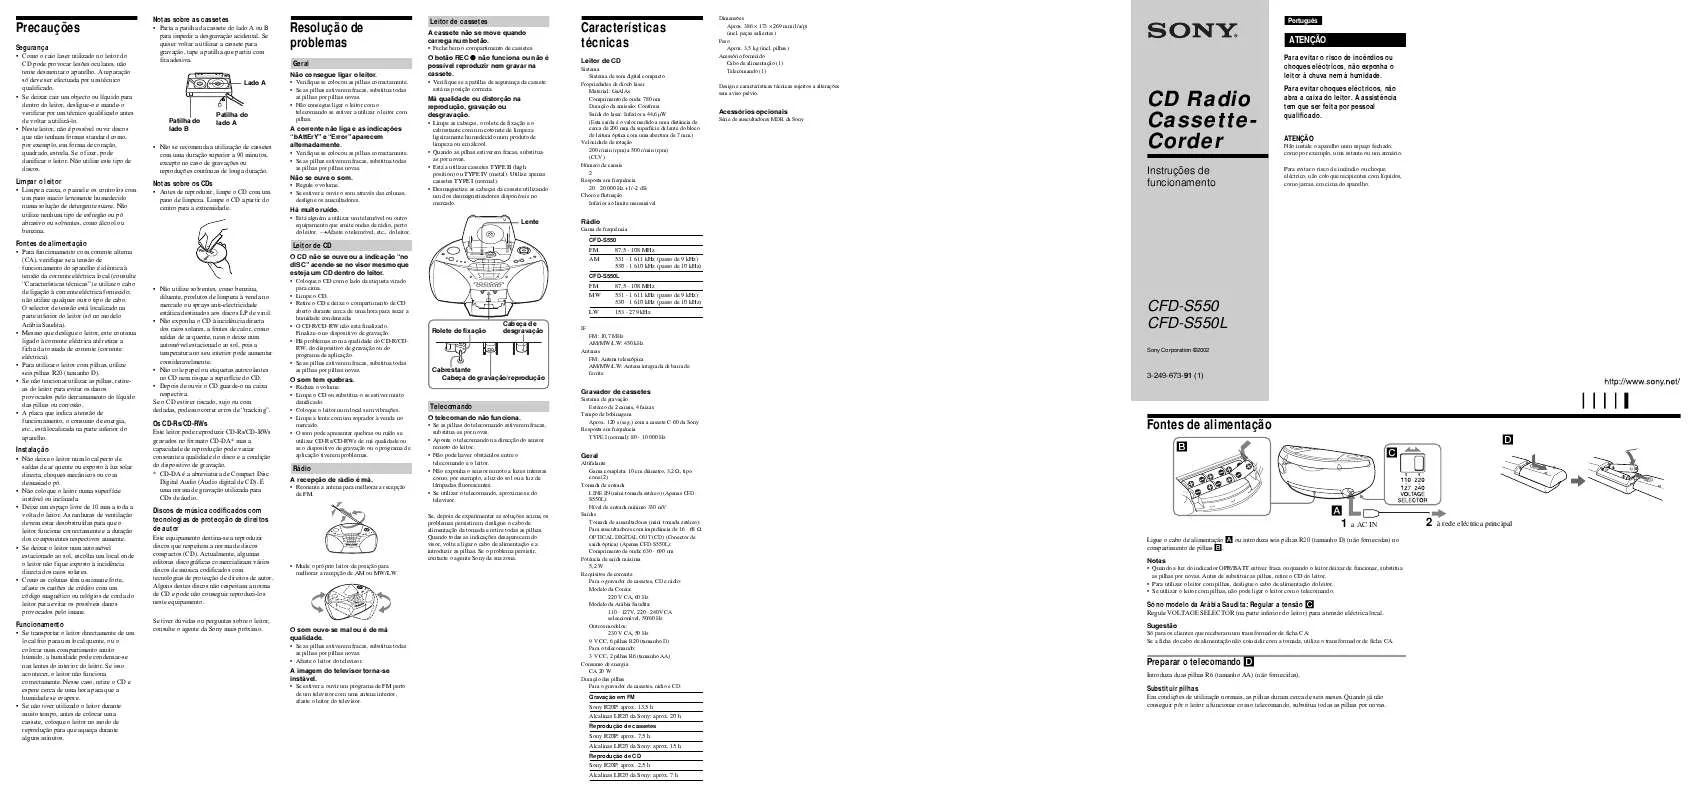 Mode d'emploi SONY CFD-S550L